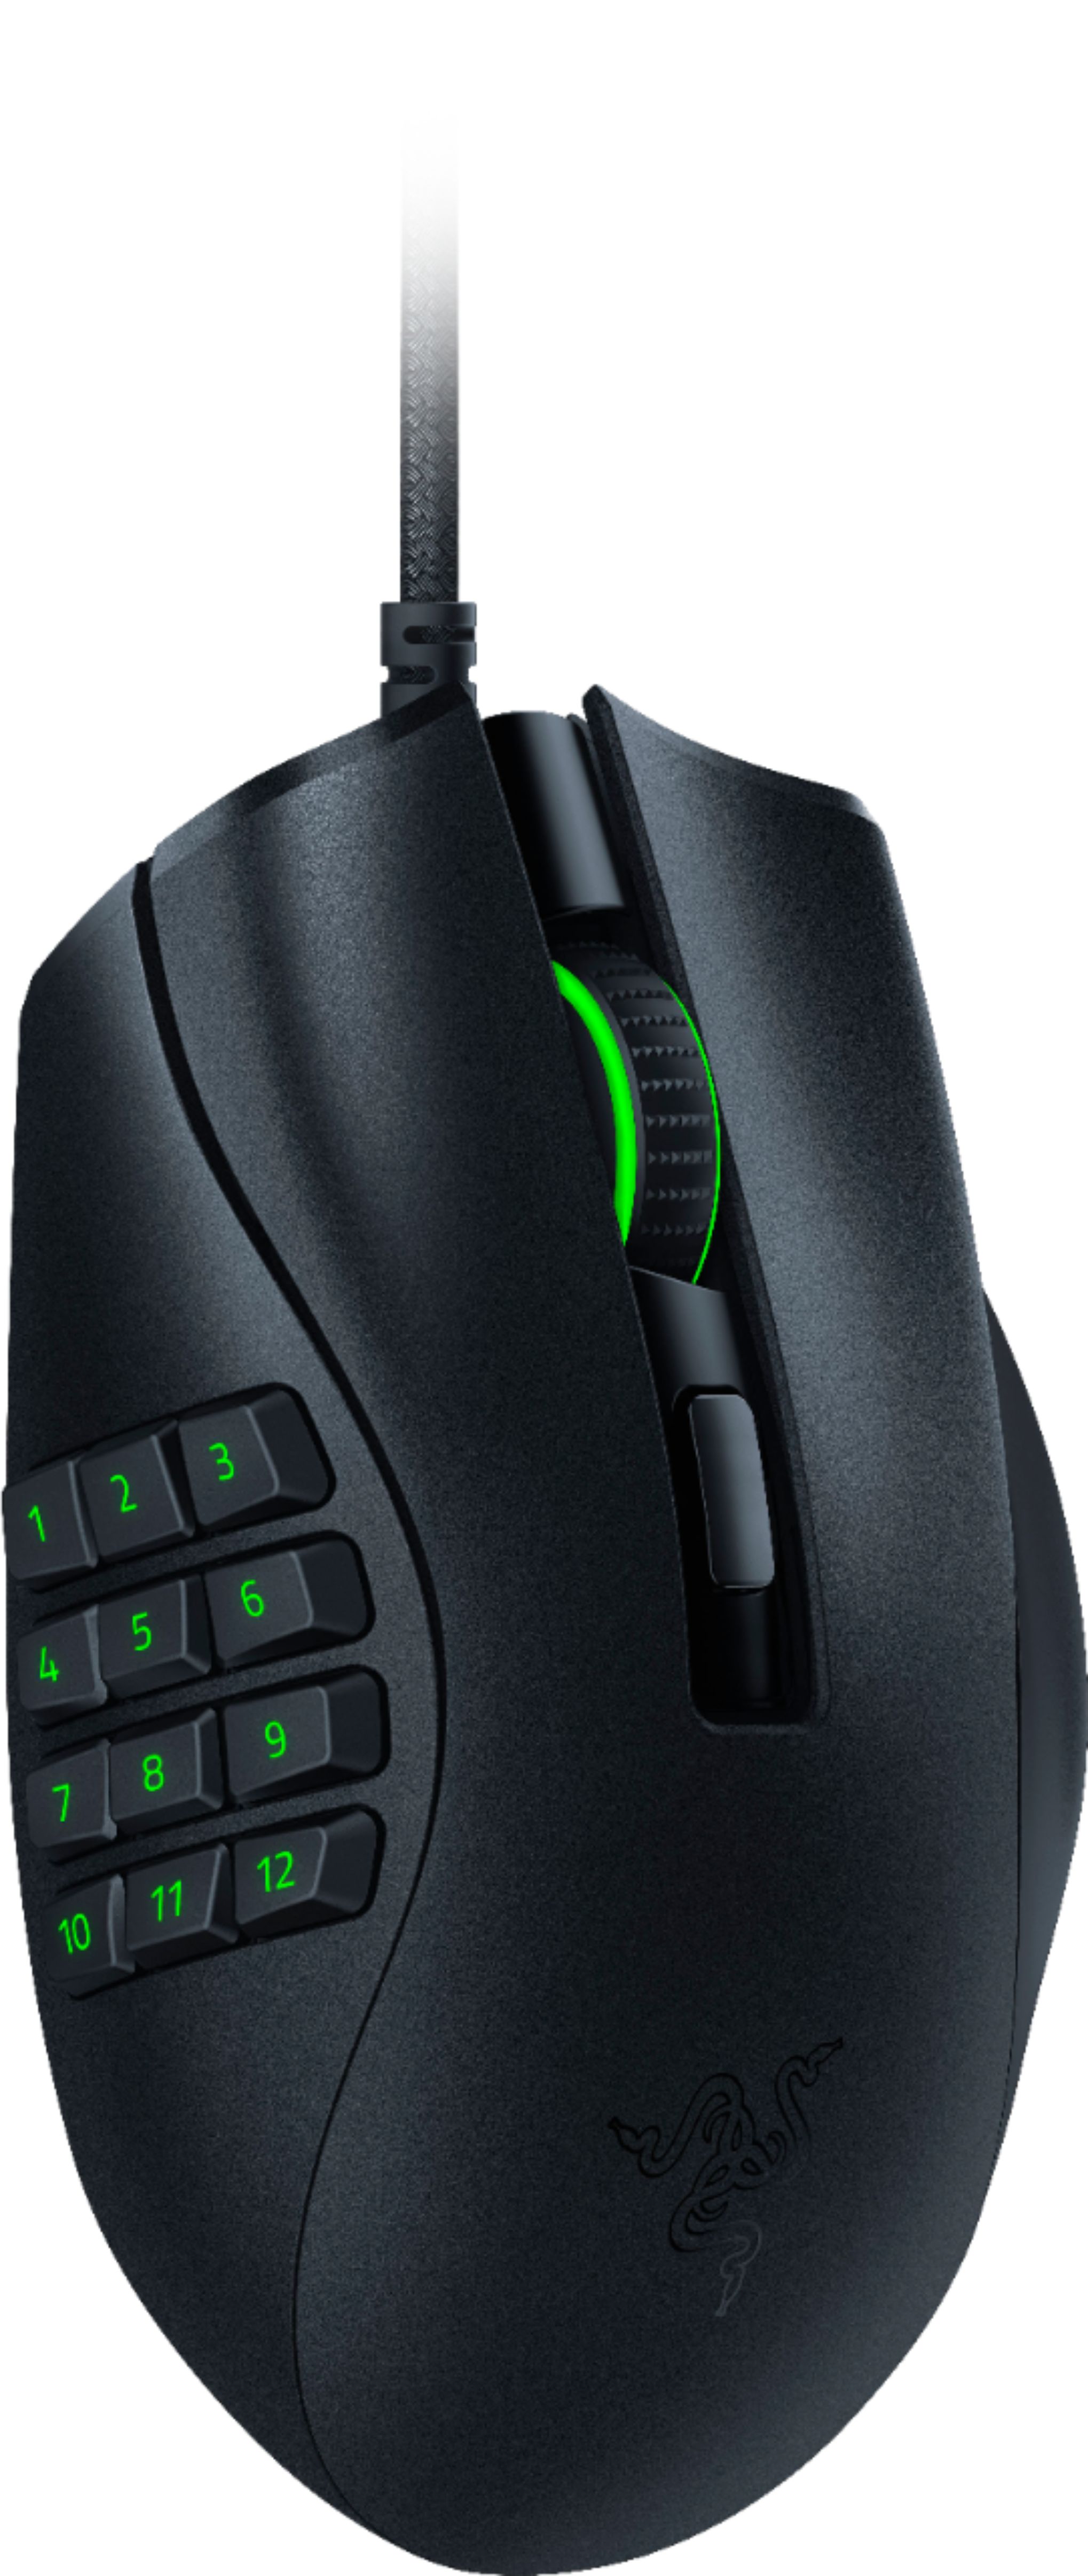 Angle View: Razer - Naga X Wired with 16 buttons and Chroma RGB Lighting Optical Gaming Mouse - Black